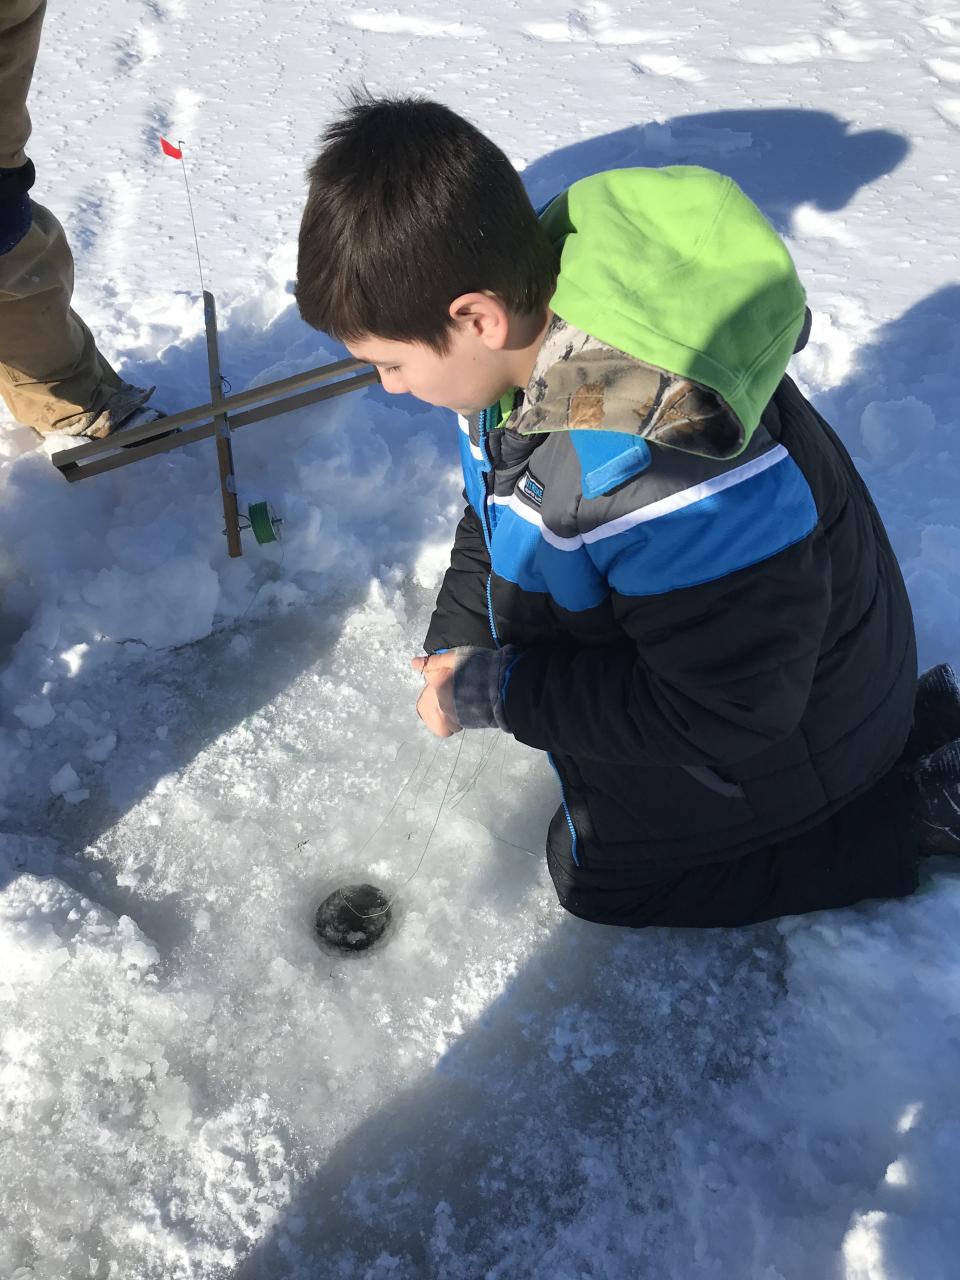 image of a young boy in winter wear looking into a drilled hole in the ice with other people around him